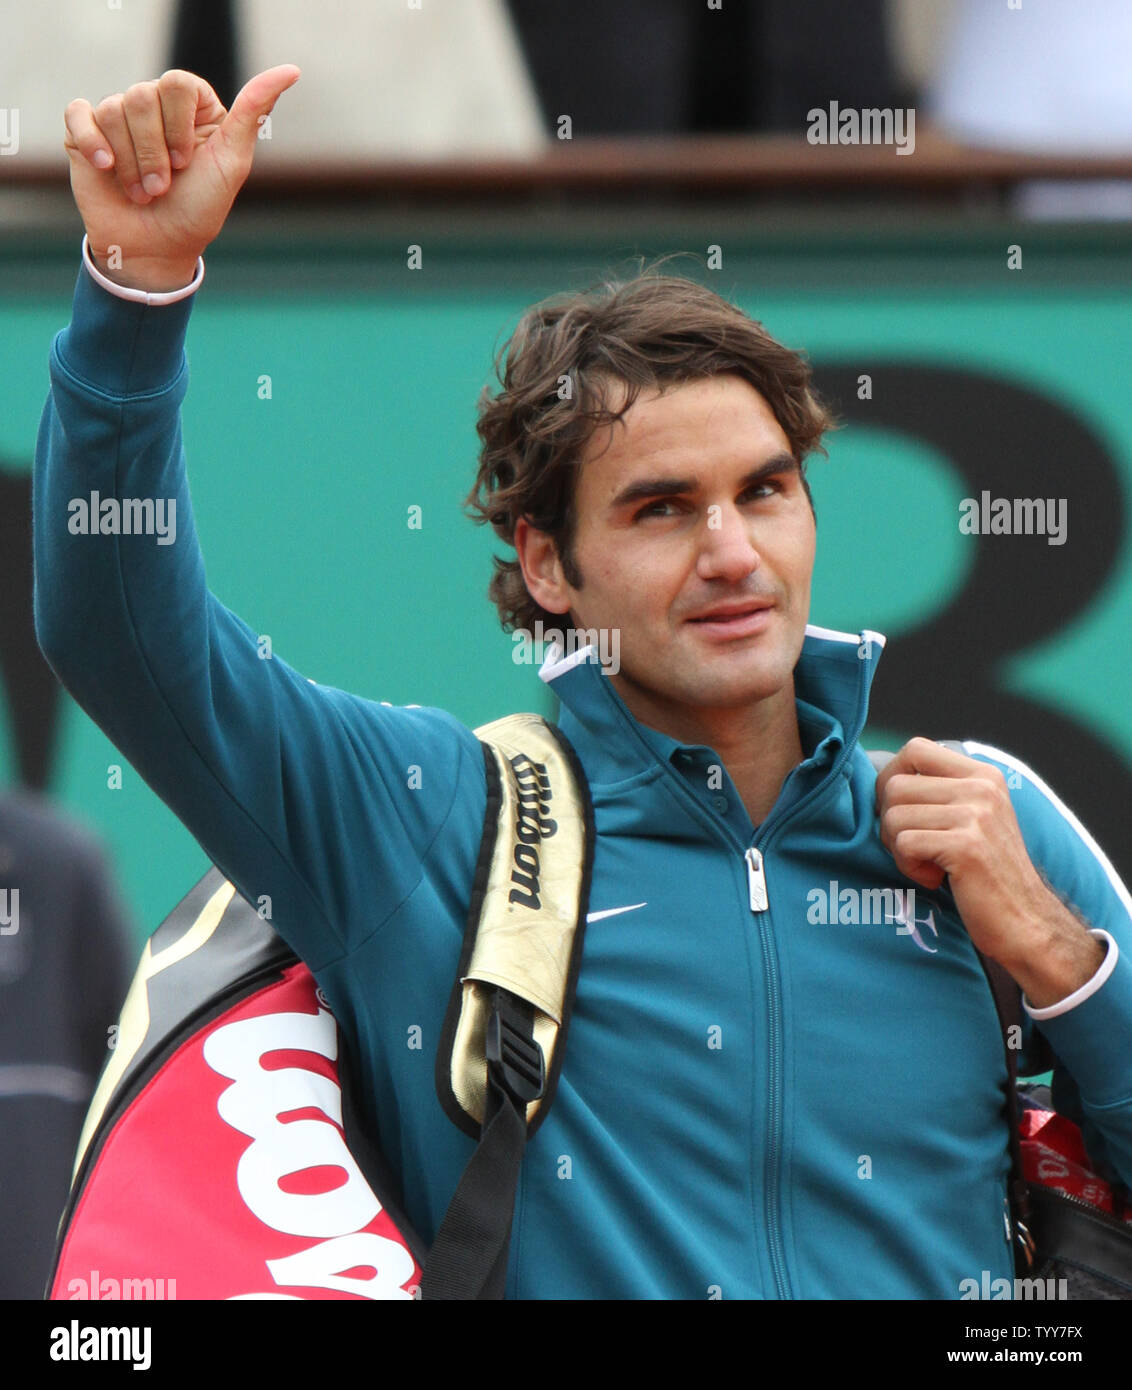 Roger Federer of Switzerland acknowledges the crowd after winning his French Open fourth-round against Stanislas Wawrinka of Switzerland at Roland Garros in Paris on May 30, 2010. Federer defeated Wawrinka 6-3,